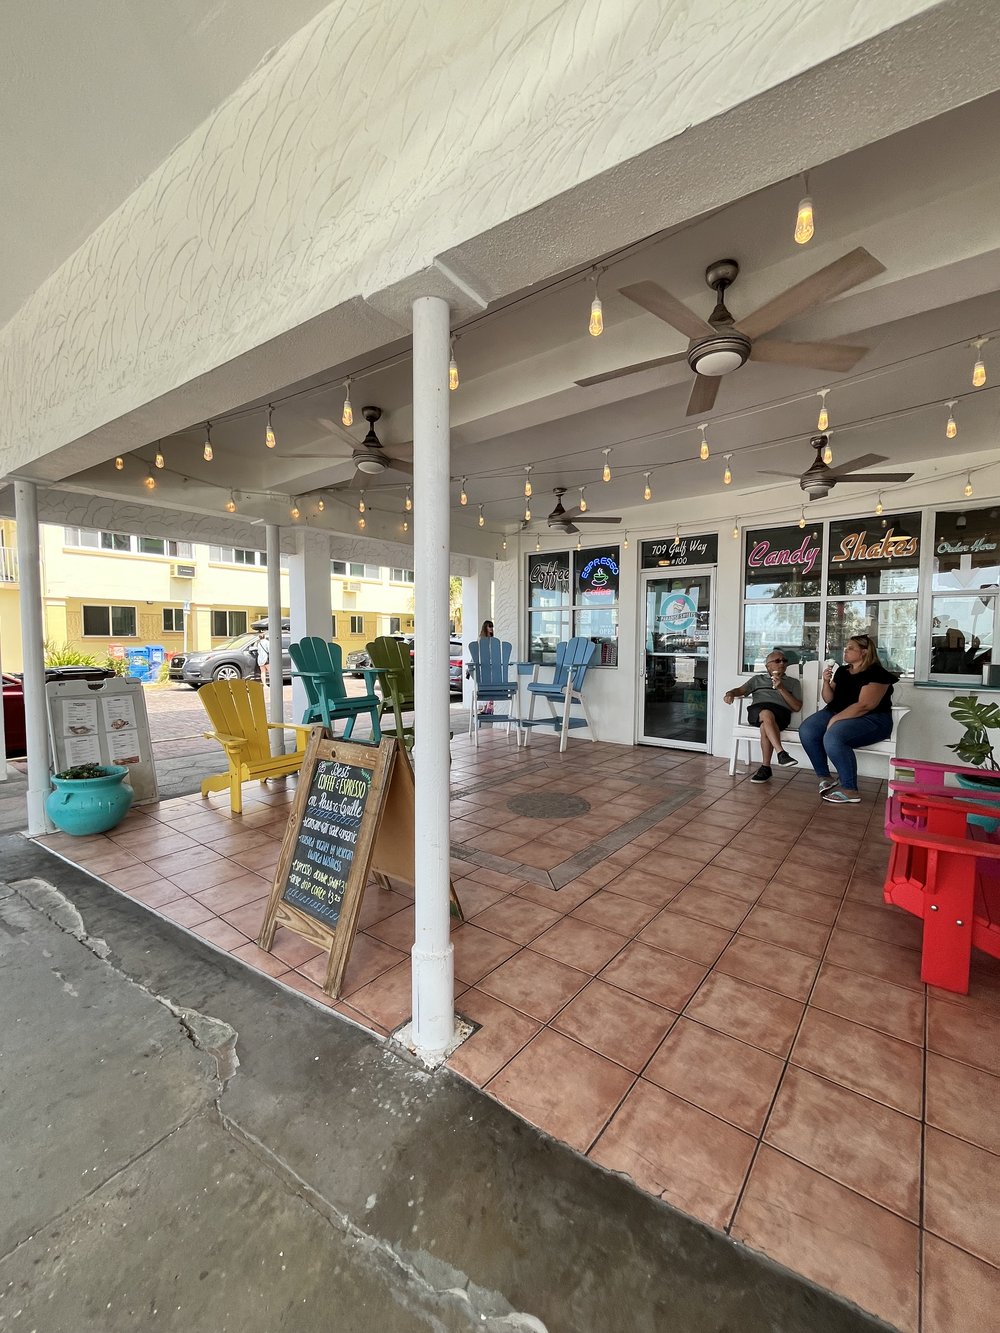 Paradise Sweets outside seating St Pete beach.jpg